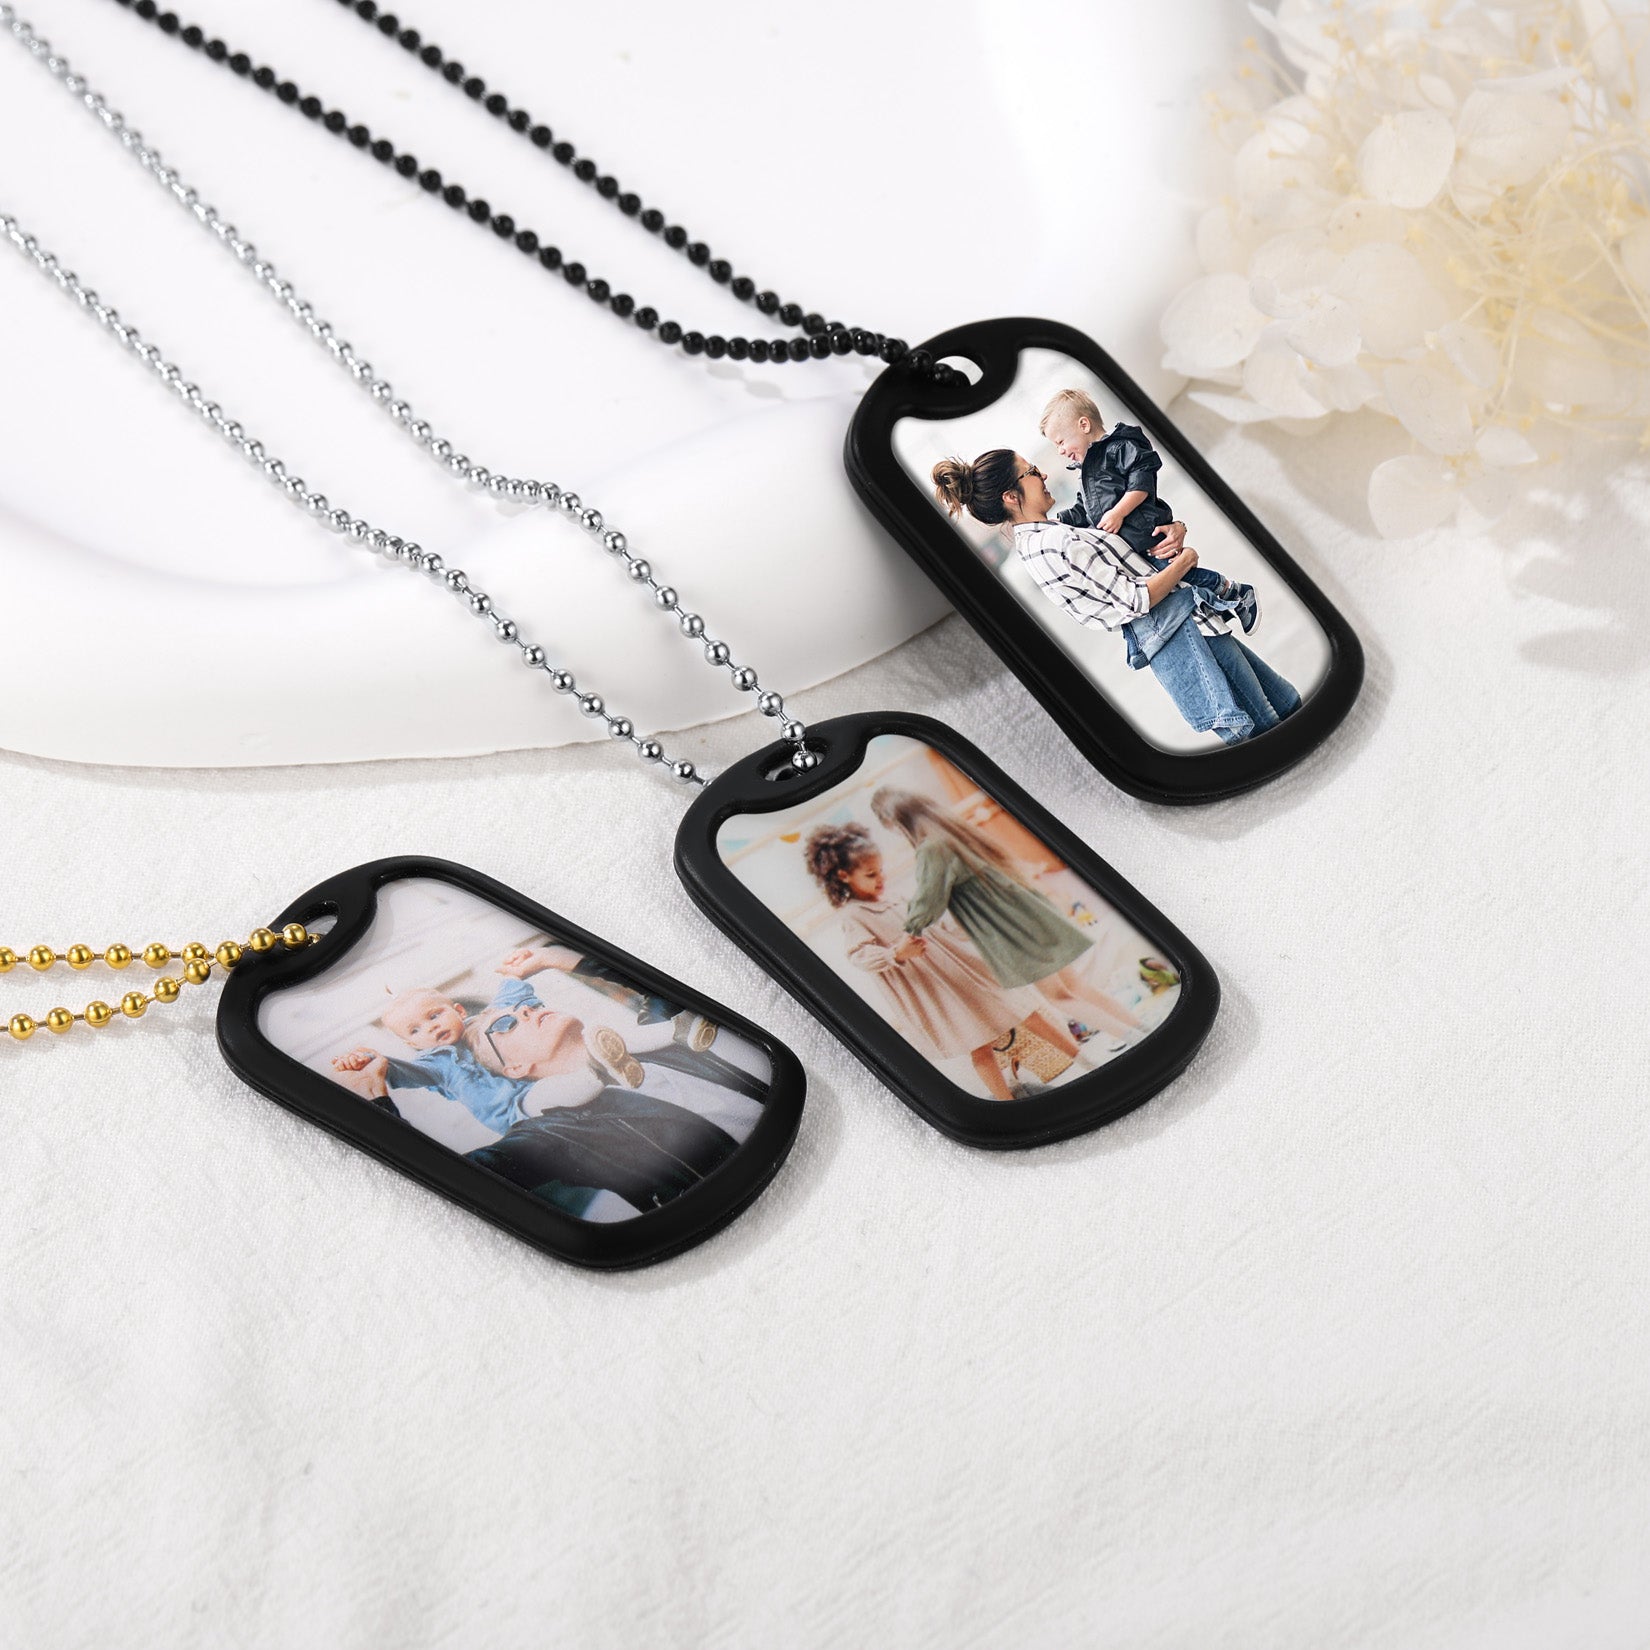 Personalized Military Photo Dog Tag Necklace with Picture For Men FaithHeart